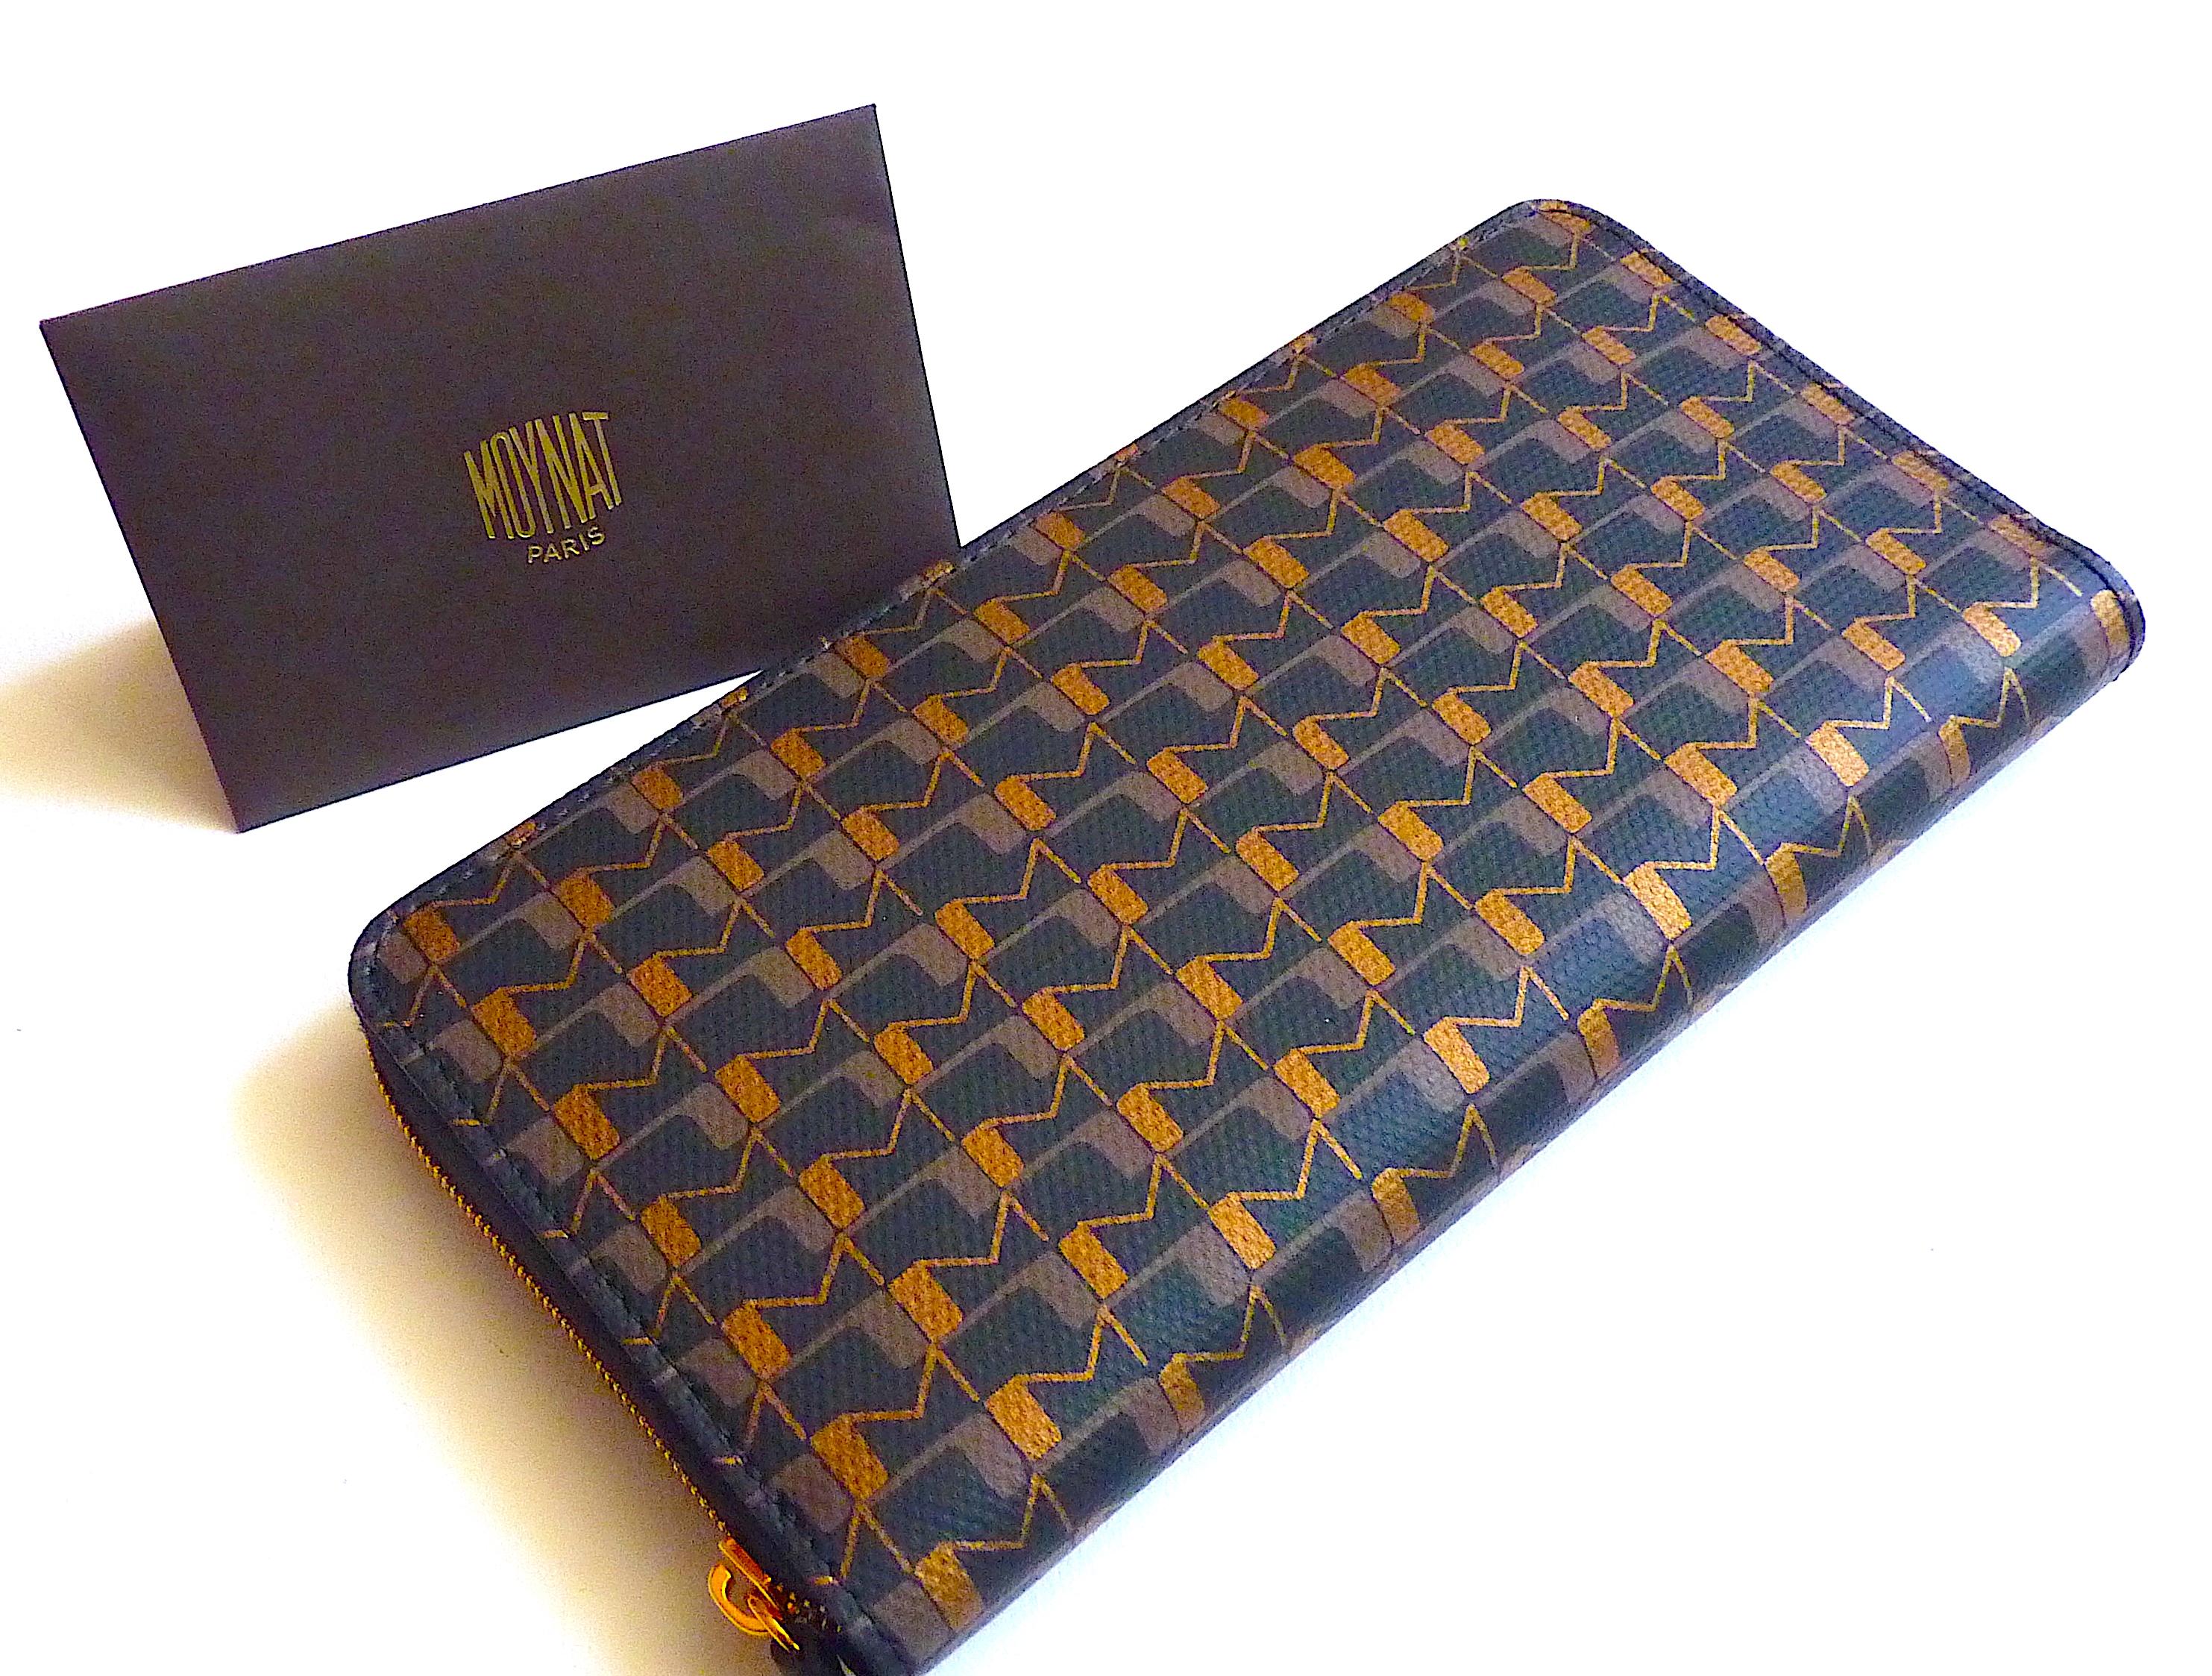 Moynat Wallet « Mirage »
Perfect wallet, compartment for cash, notes, cards ...
Charcoal Leather inside
Charcoal and Gold Canvas outside with Moynat Logo
Stamped Moynat Paris Made in France inside

Condition : Brand new, never used, absolutely